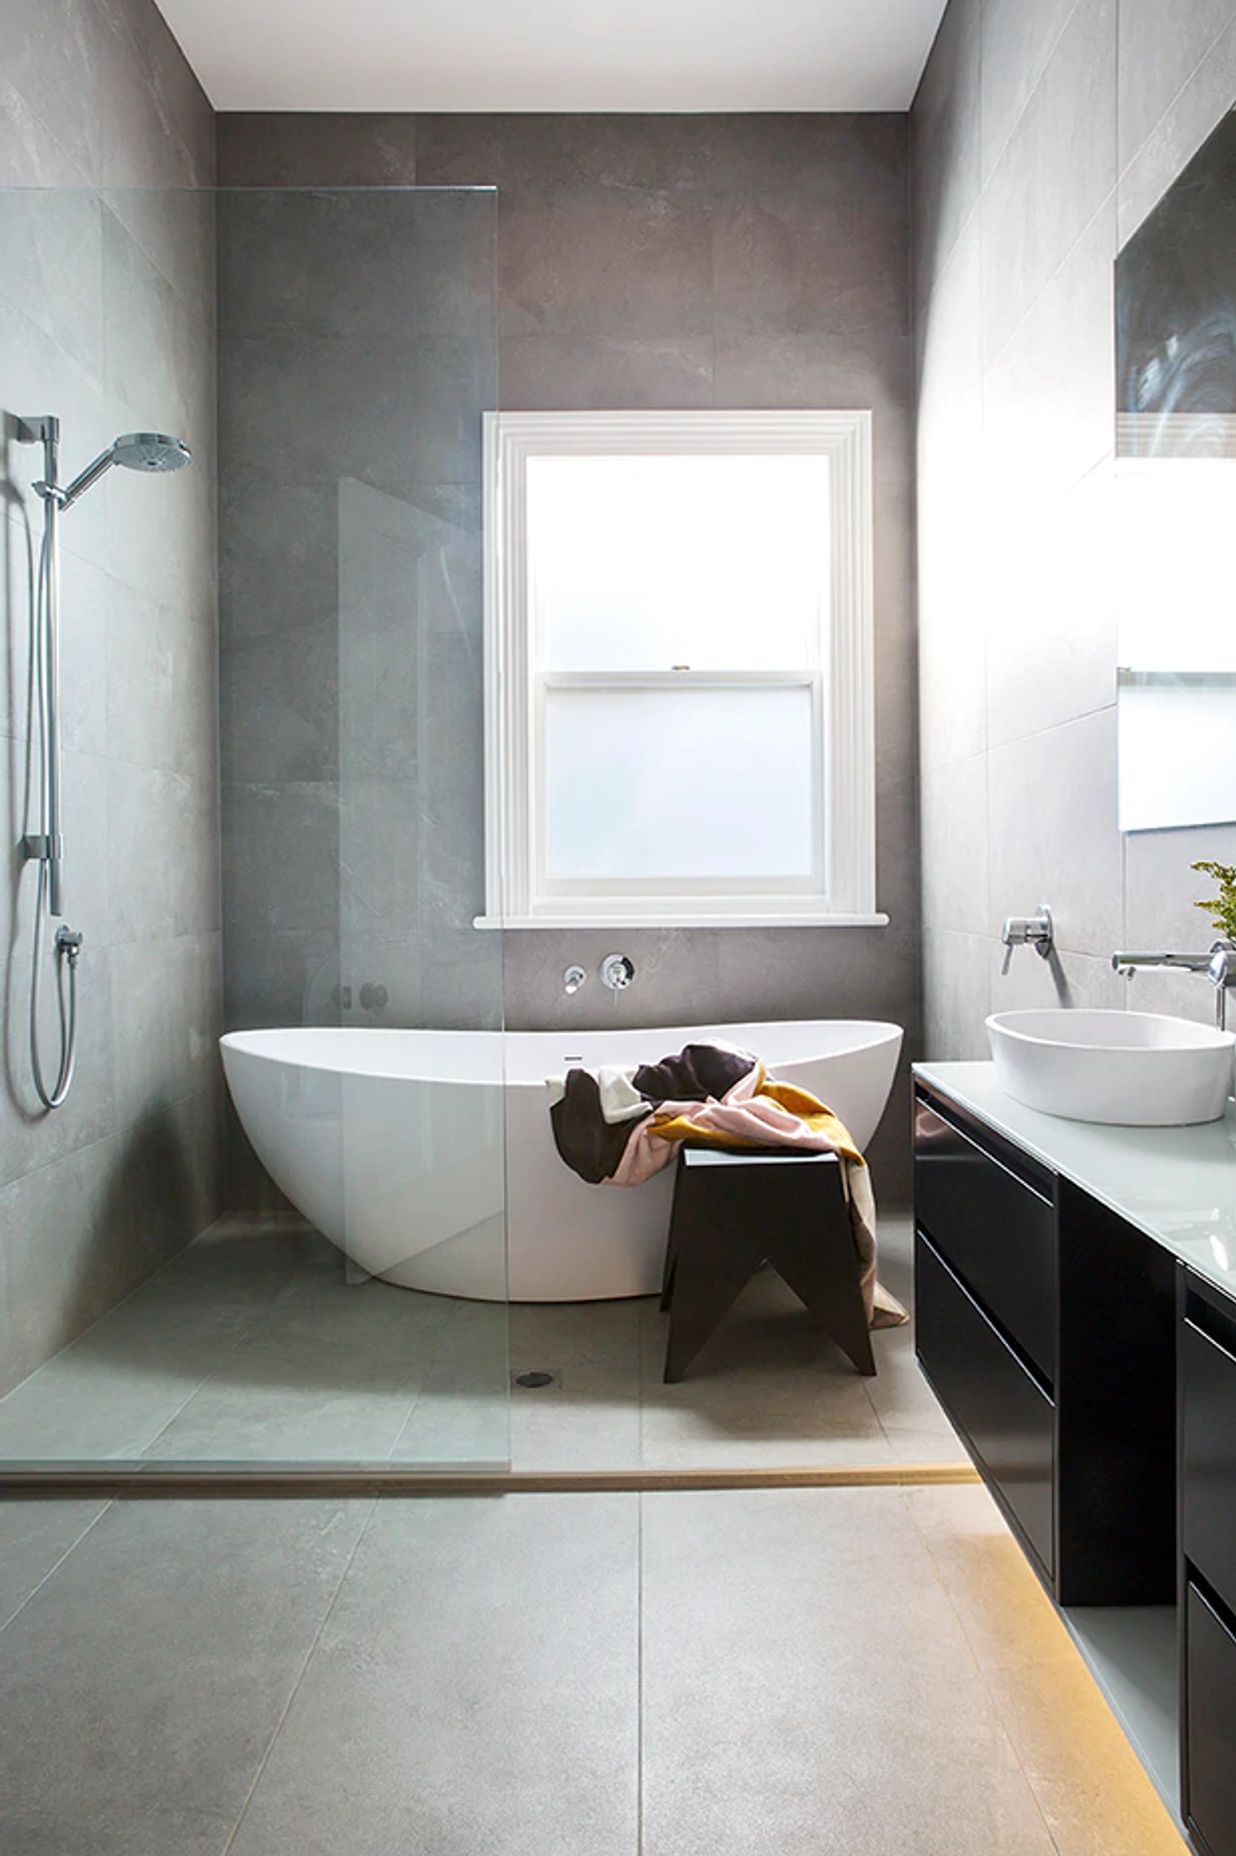 A freestanding tub is the ultimate luxury, but leave enough room around it for cleaning.